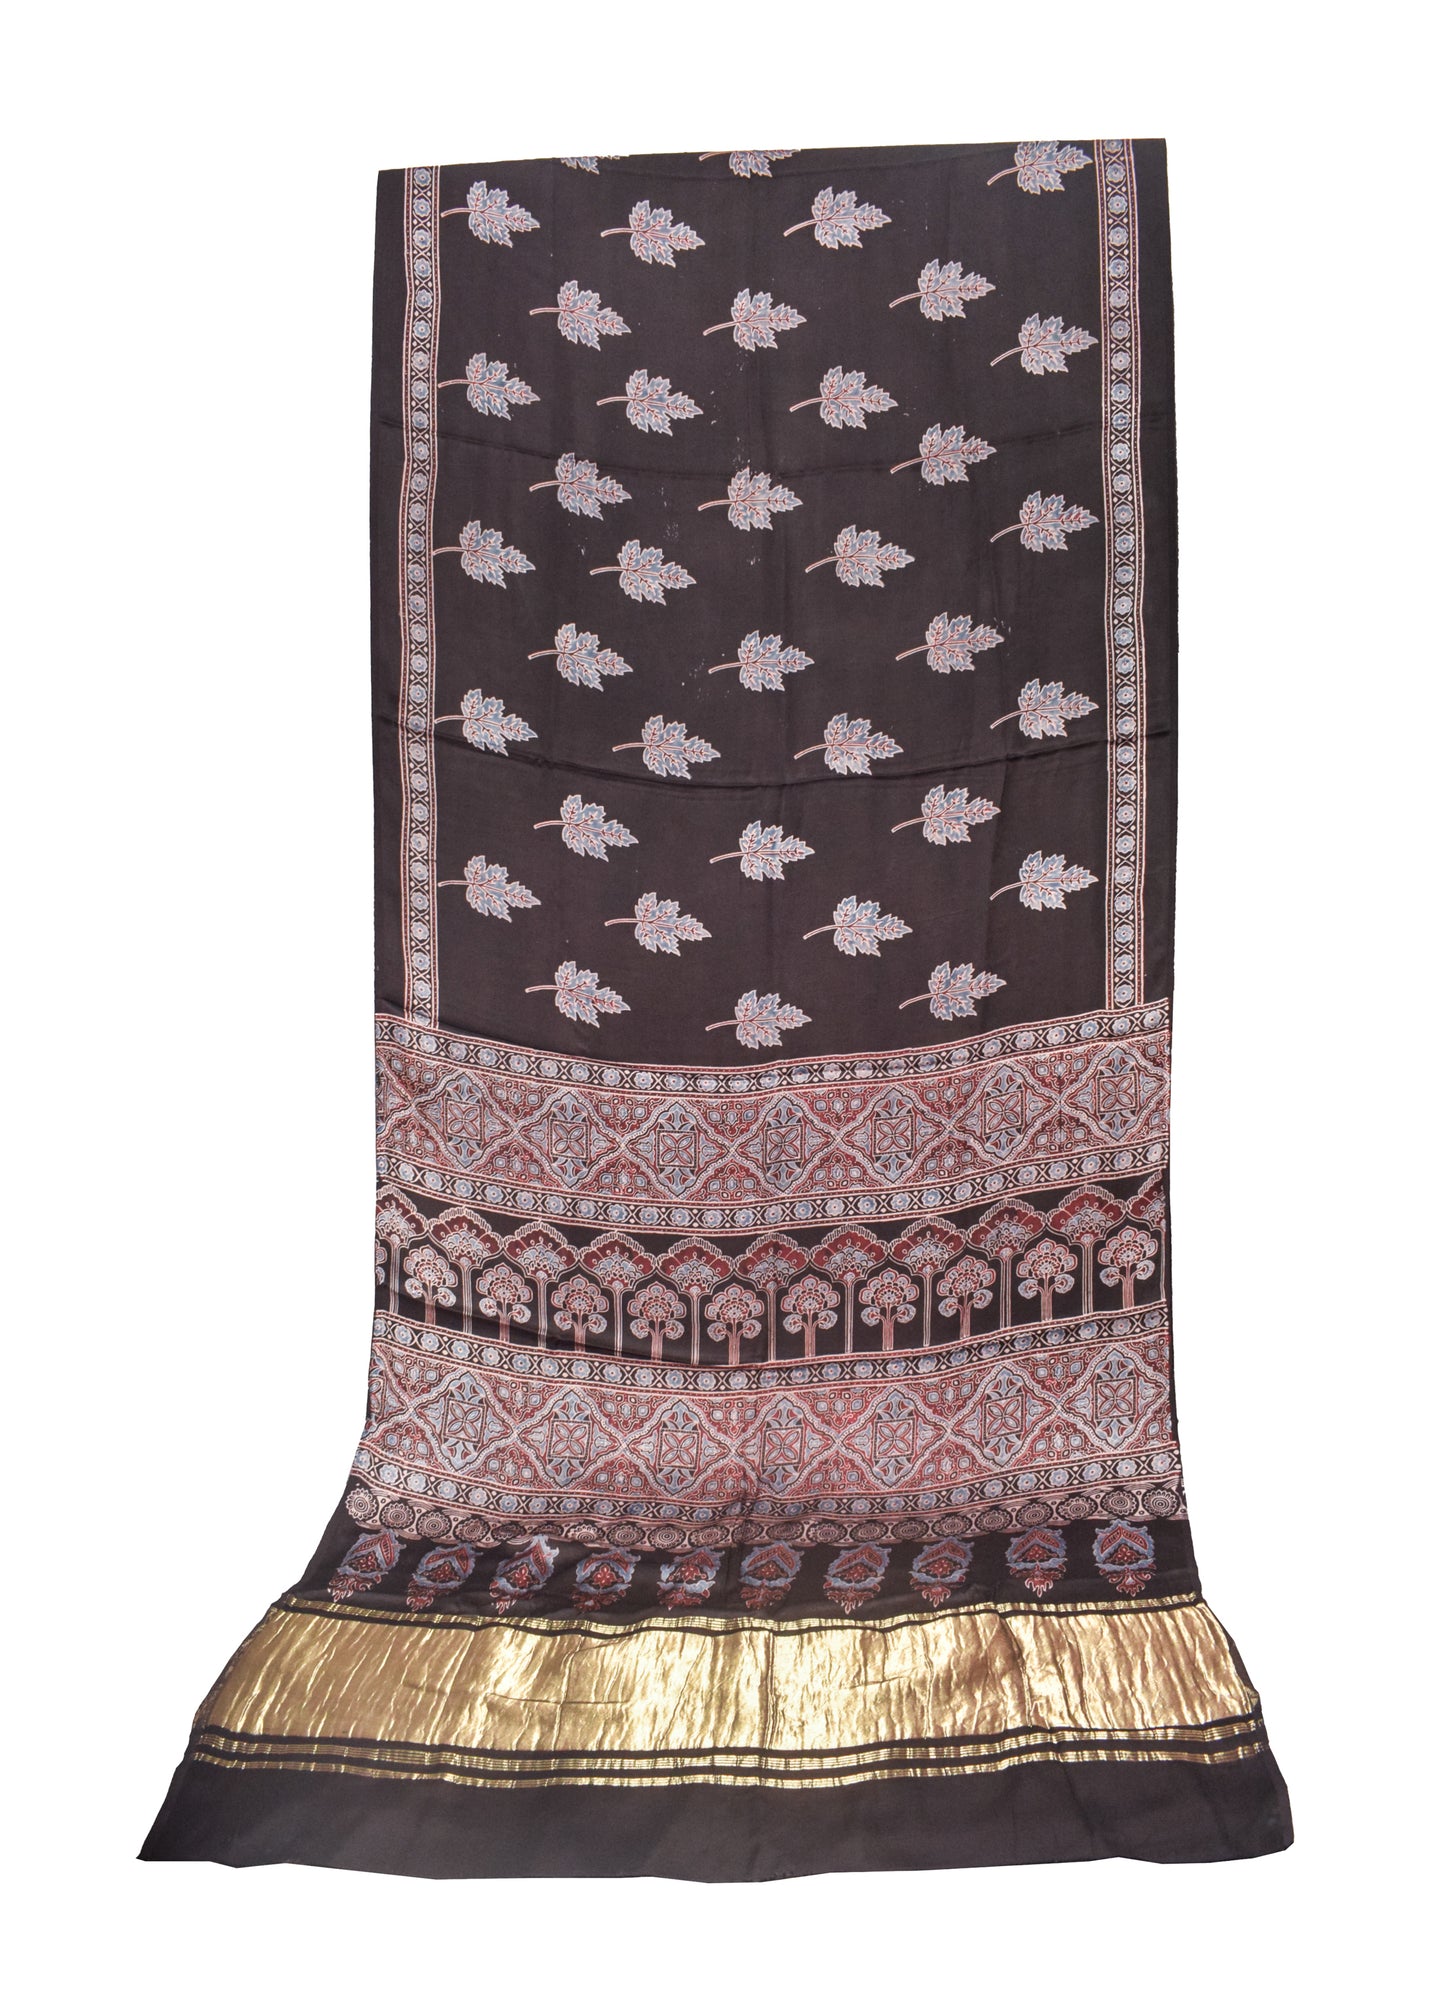 Ajrakh Modal Silk Natural Dye Hand Block Print Saree   With Golden Border  - With Blouse Piece - 6 mtrs Length    -  SKU : ID15101K